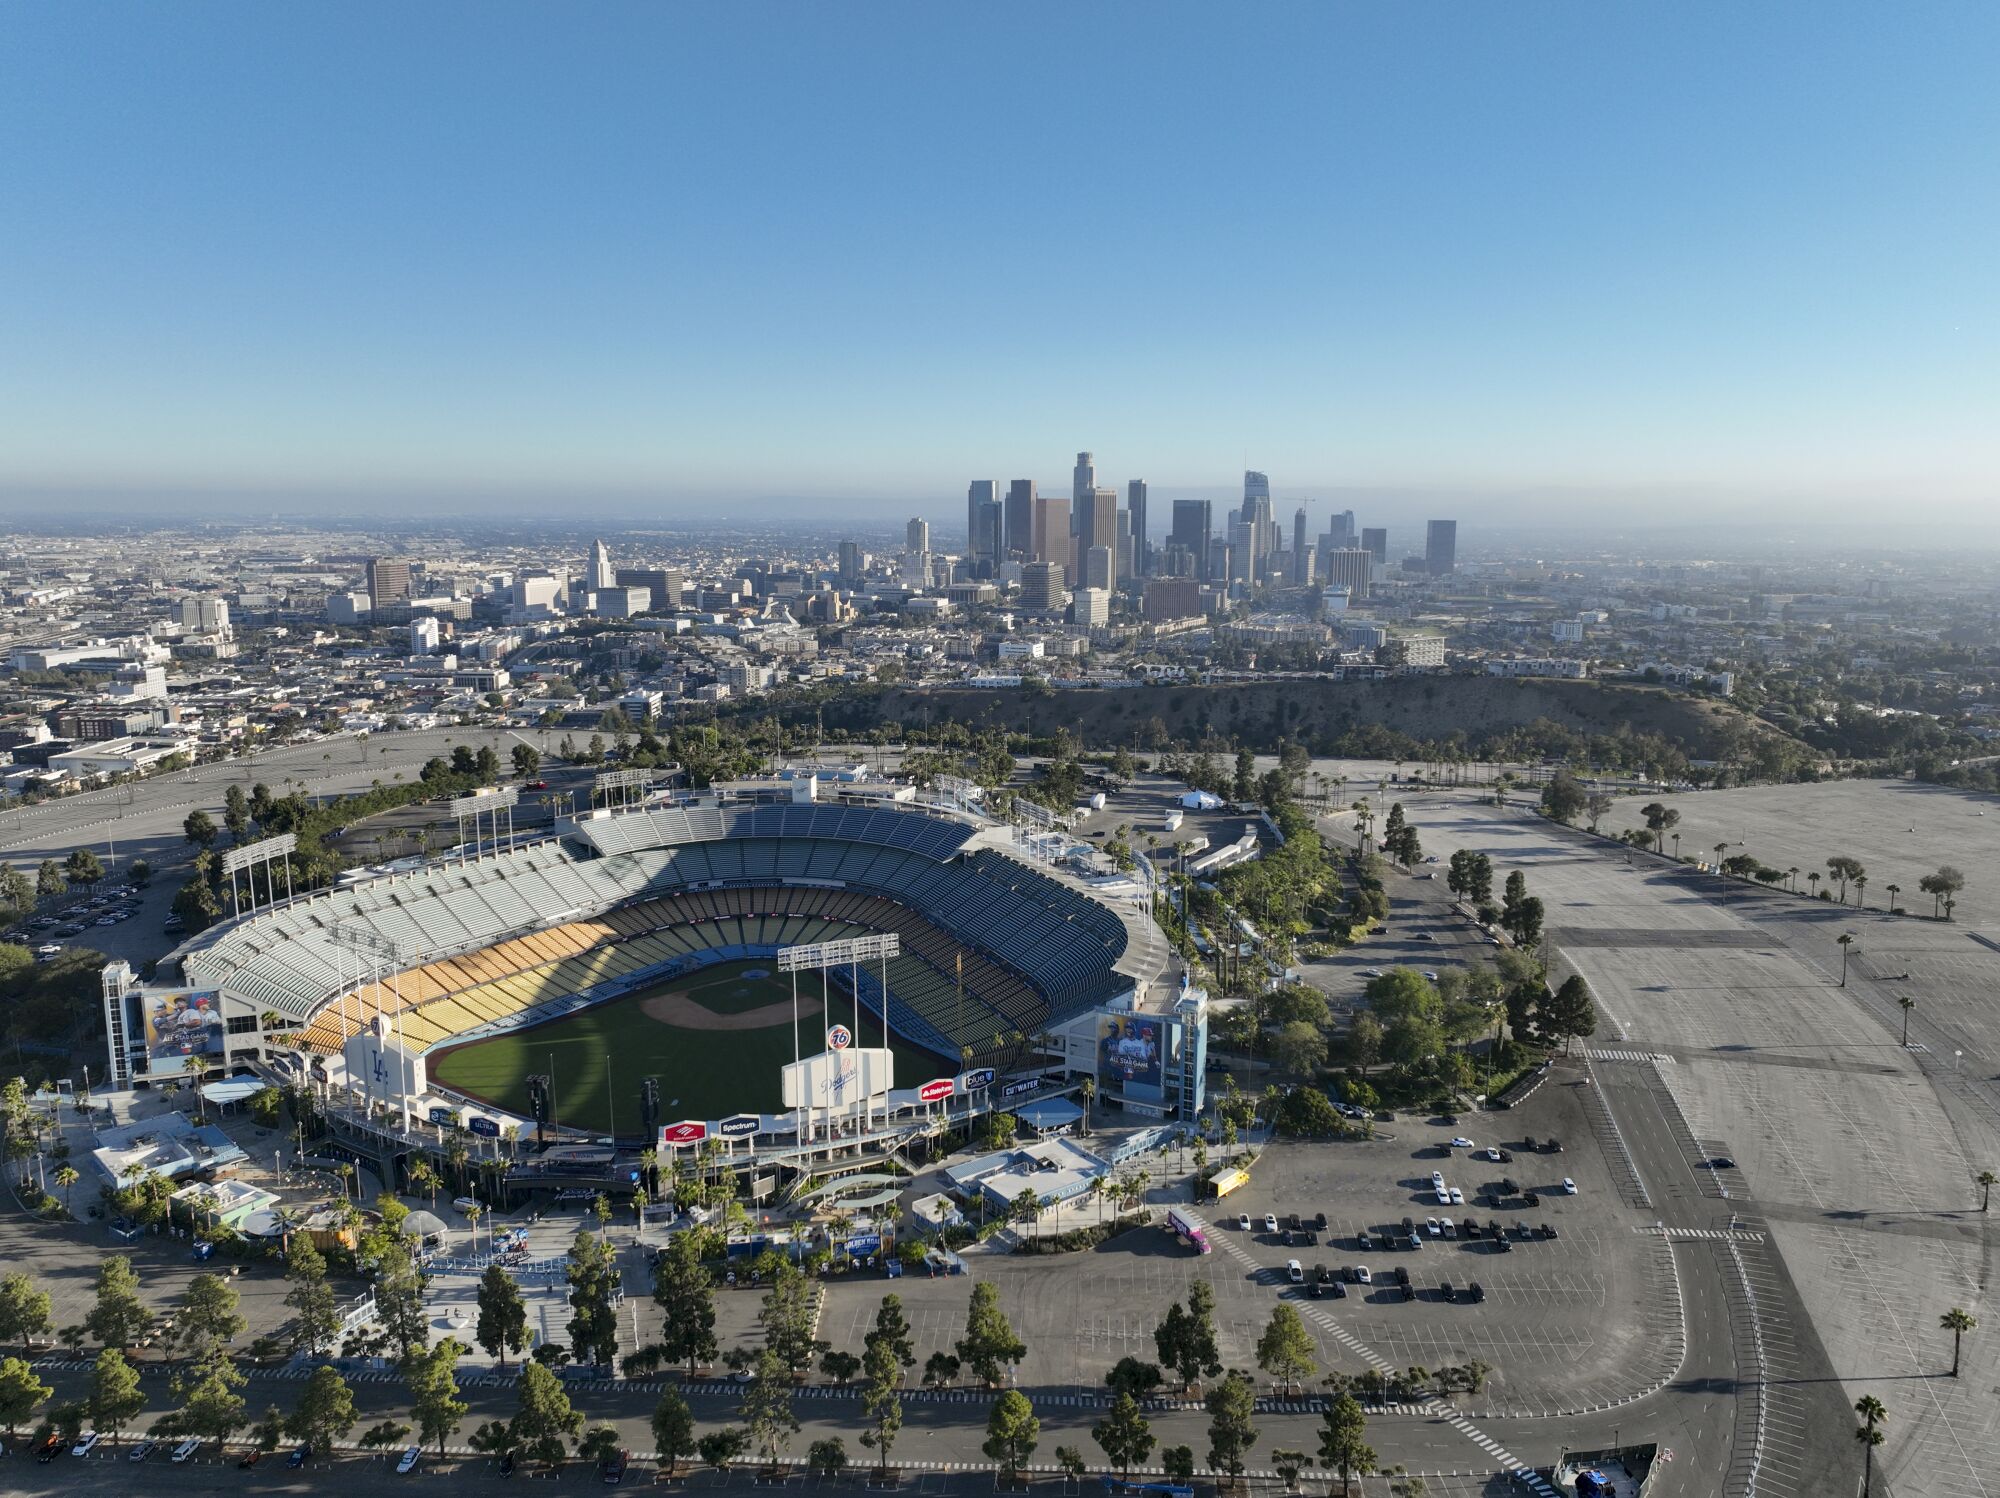 An aerial view of Dodger Stadium, with downtown Los Angeles in the background.